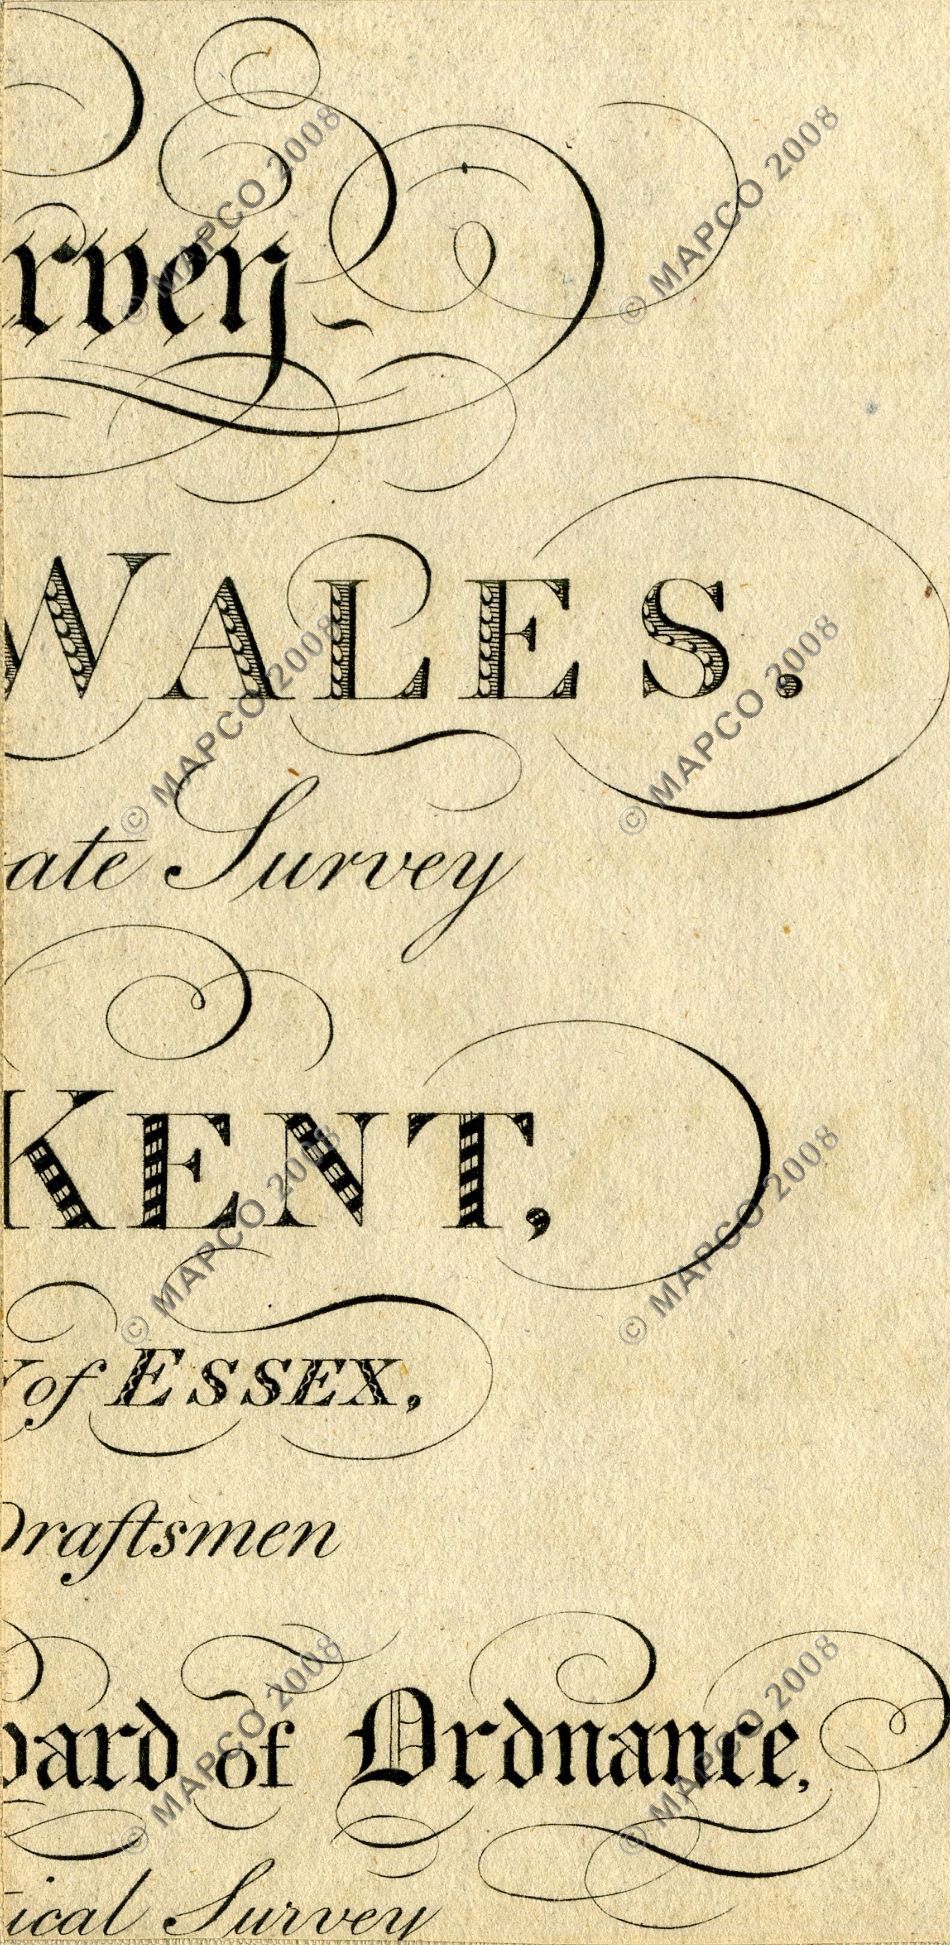 An Entirely New & Accurate Survey Of The County Of Kent, With Part Of The County Of Essex, by William Mudge, 1801.